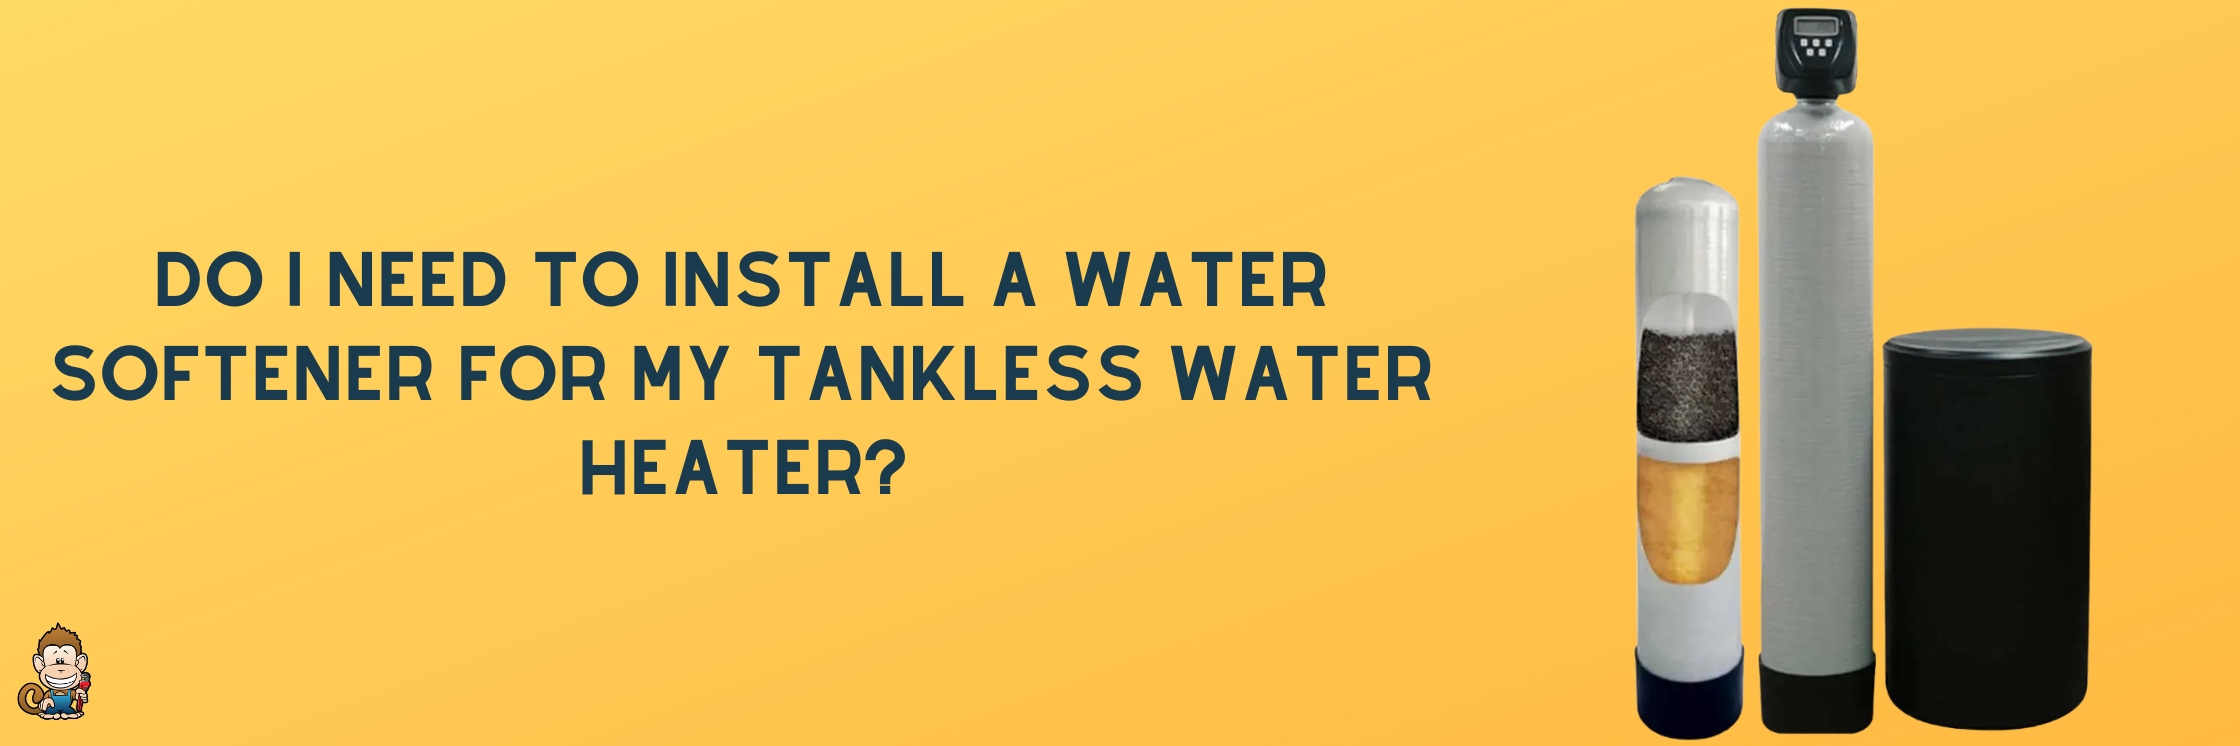 Do I Need to Install a Water Softener for My Tankless Water Heater?